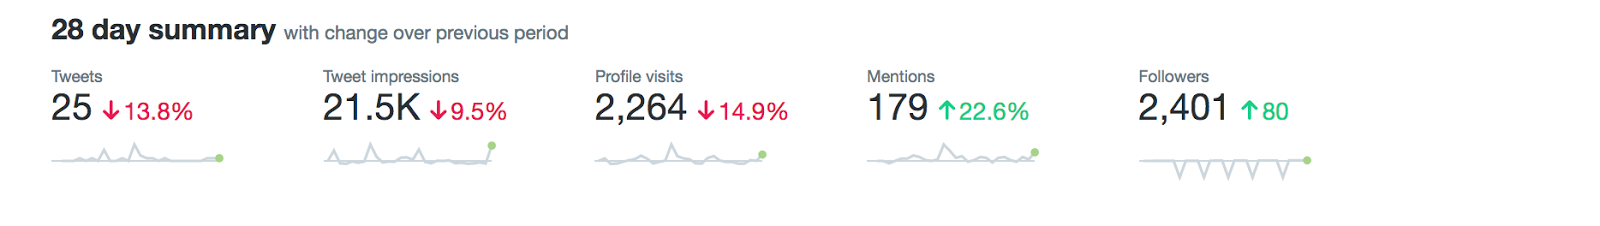 Impressions are down, but mentions and followers are up.